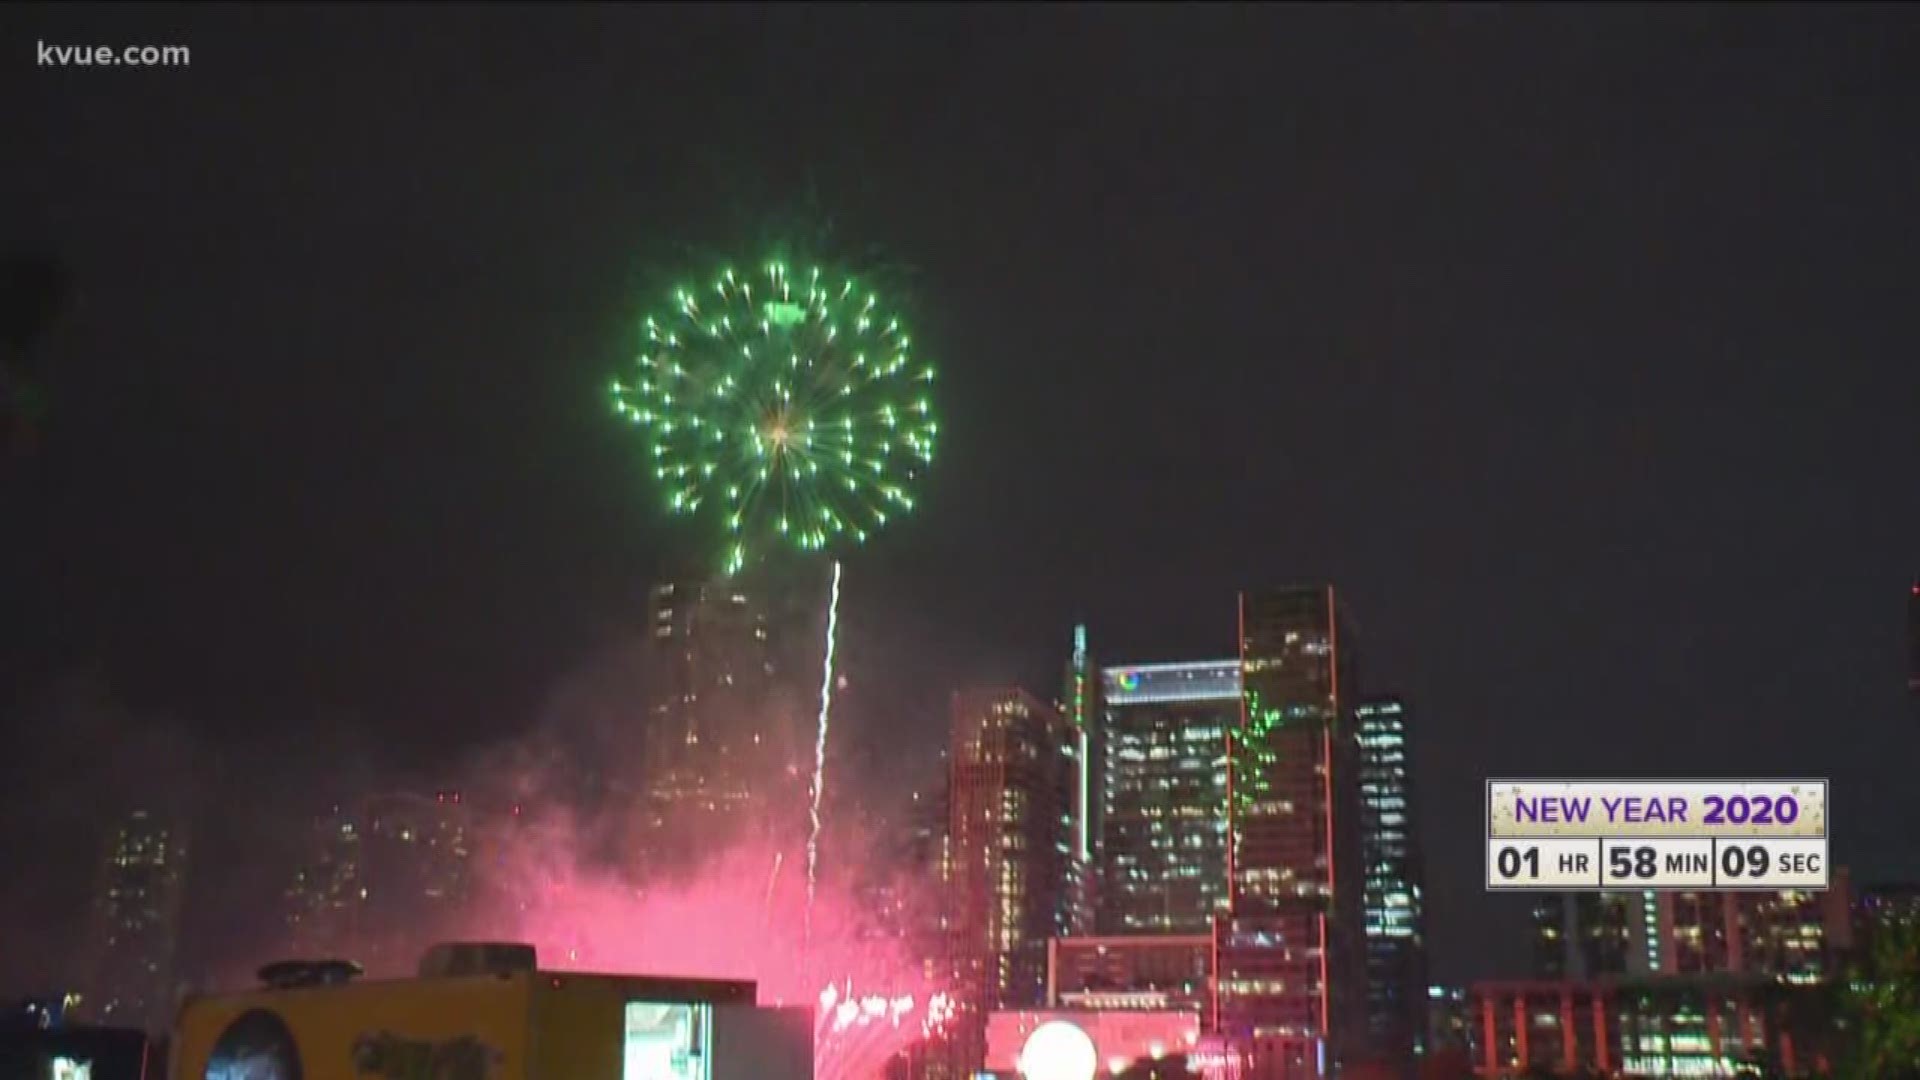 Luis De Leon joined us live from the City's official fireworks display.